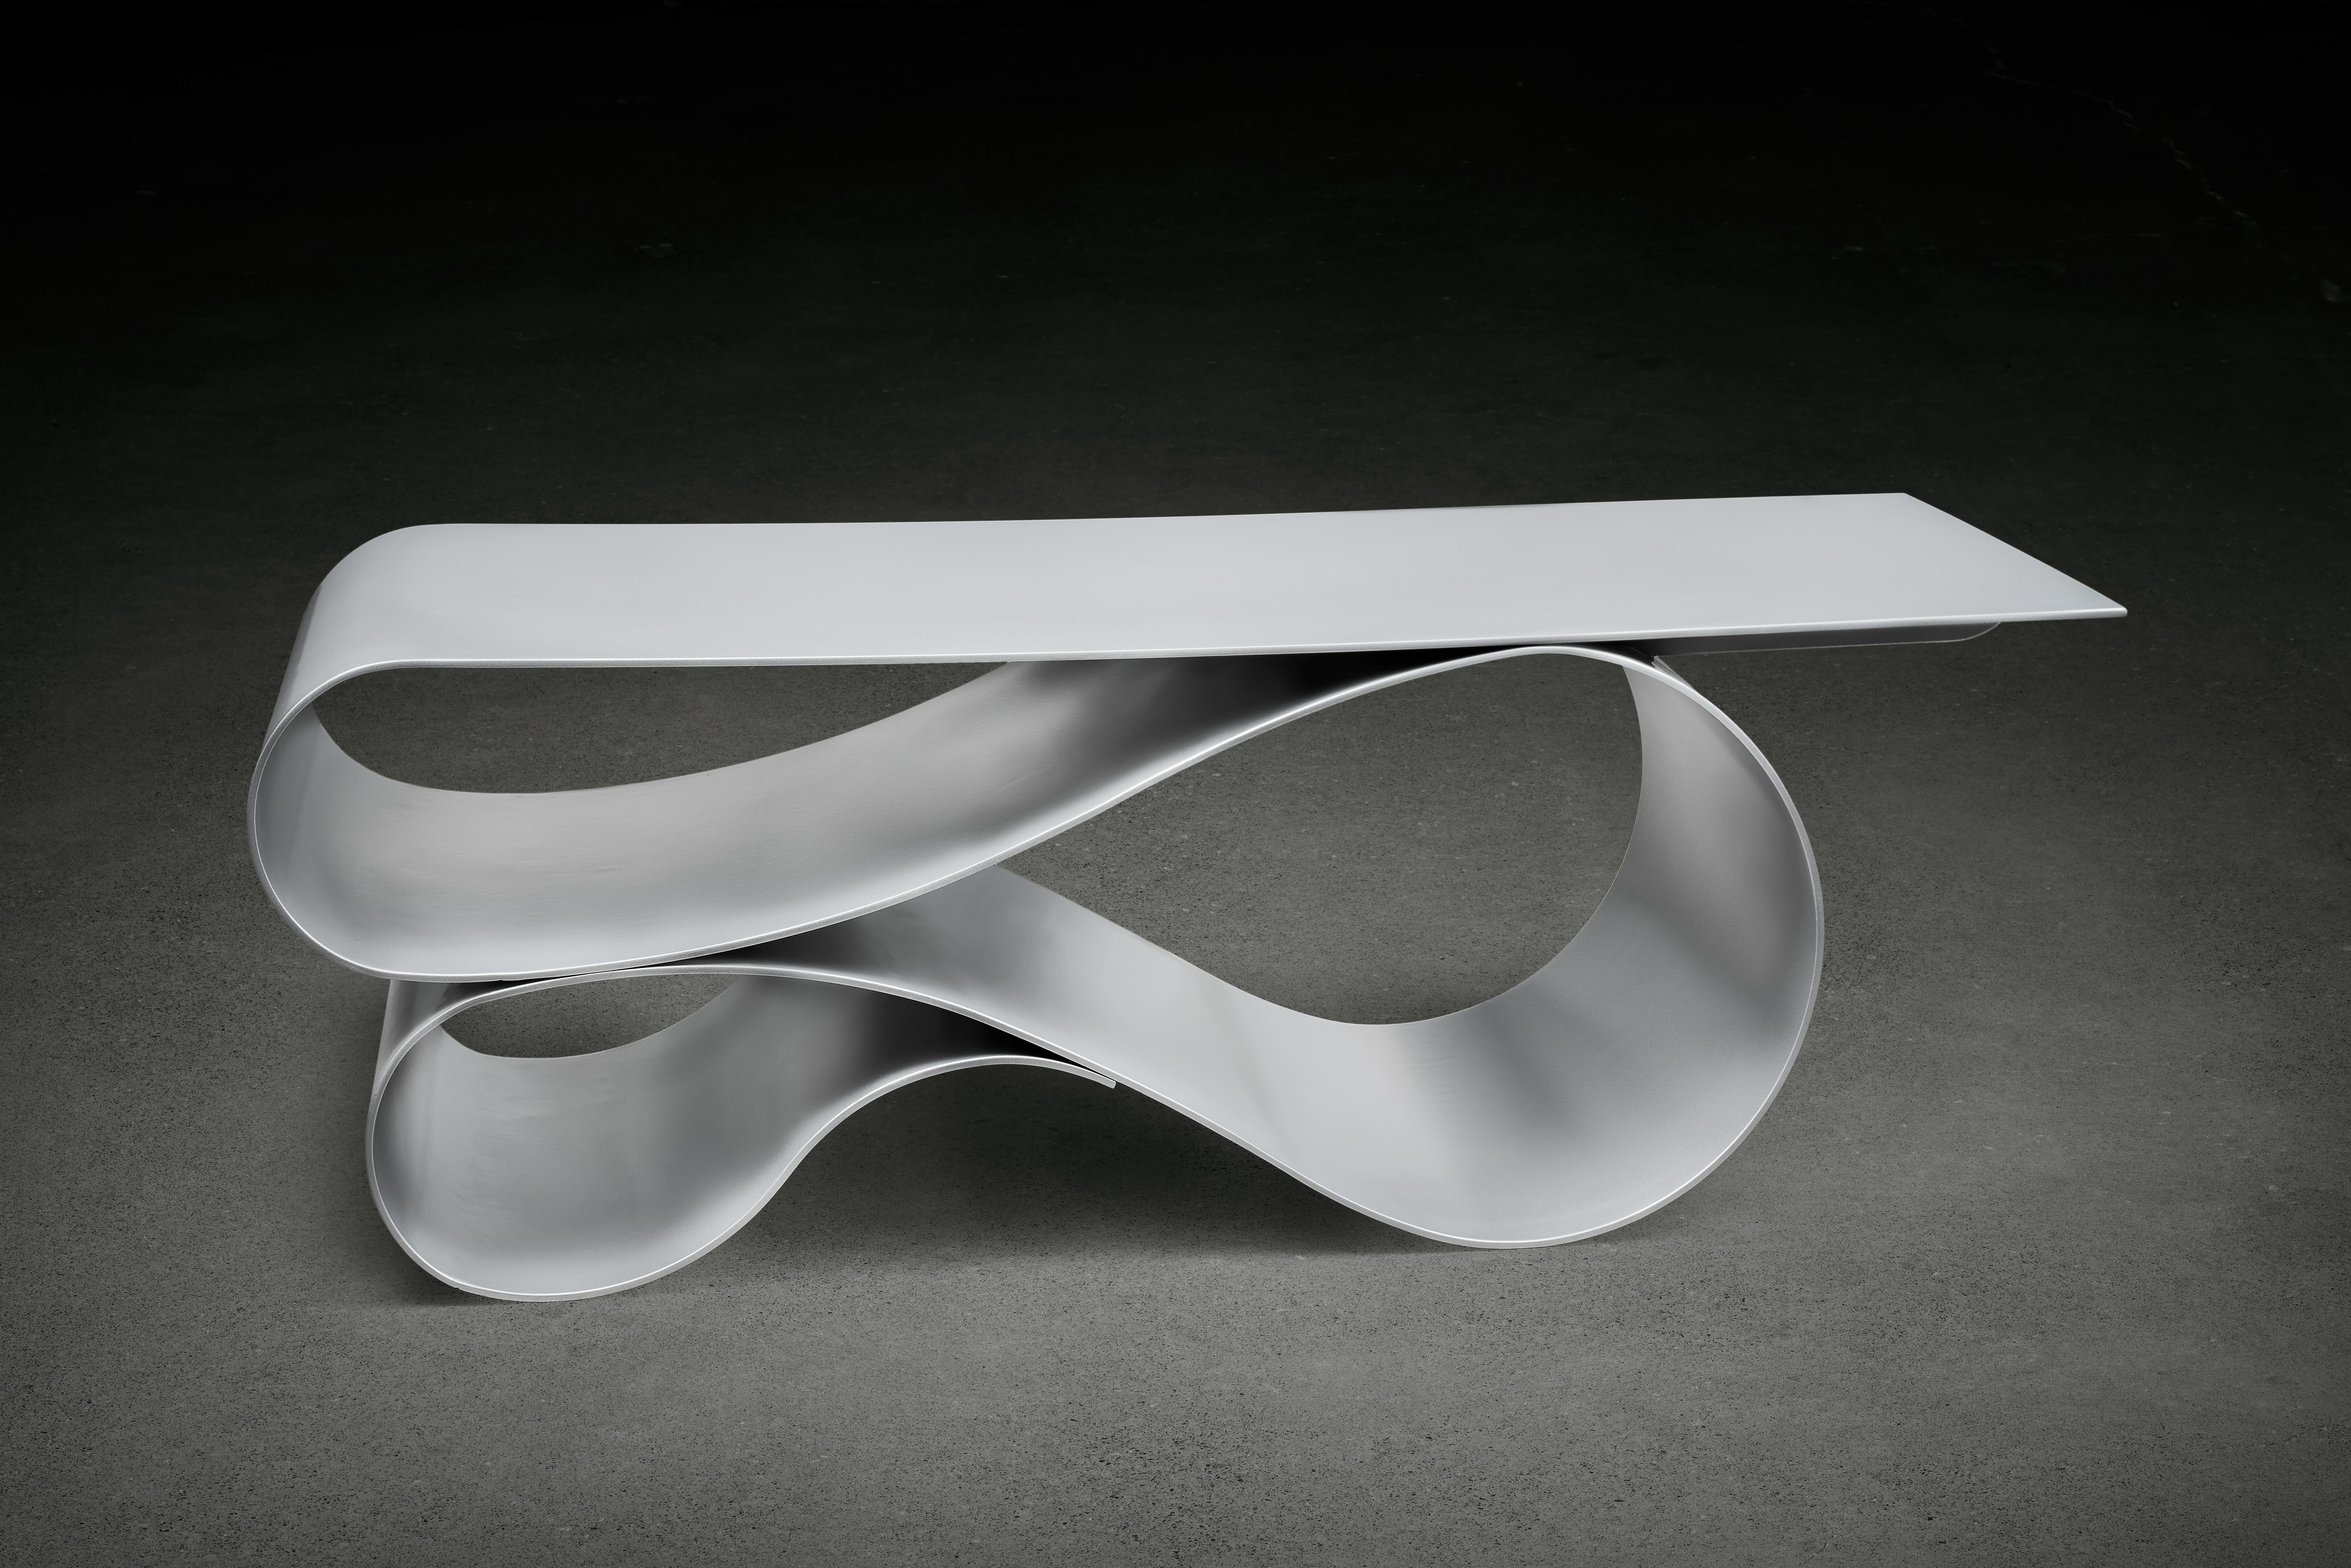 Whorl coffee table in powder coated aluminum by Neal Aronowitz Design
Dimensions: D 61 x W 139.7 x H 45.7 cm
Materials: Aluminium.
Size and color can be modified and customized. 

An elegant and powerful sculptural statement. This is a console